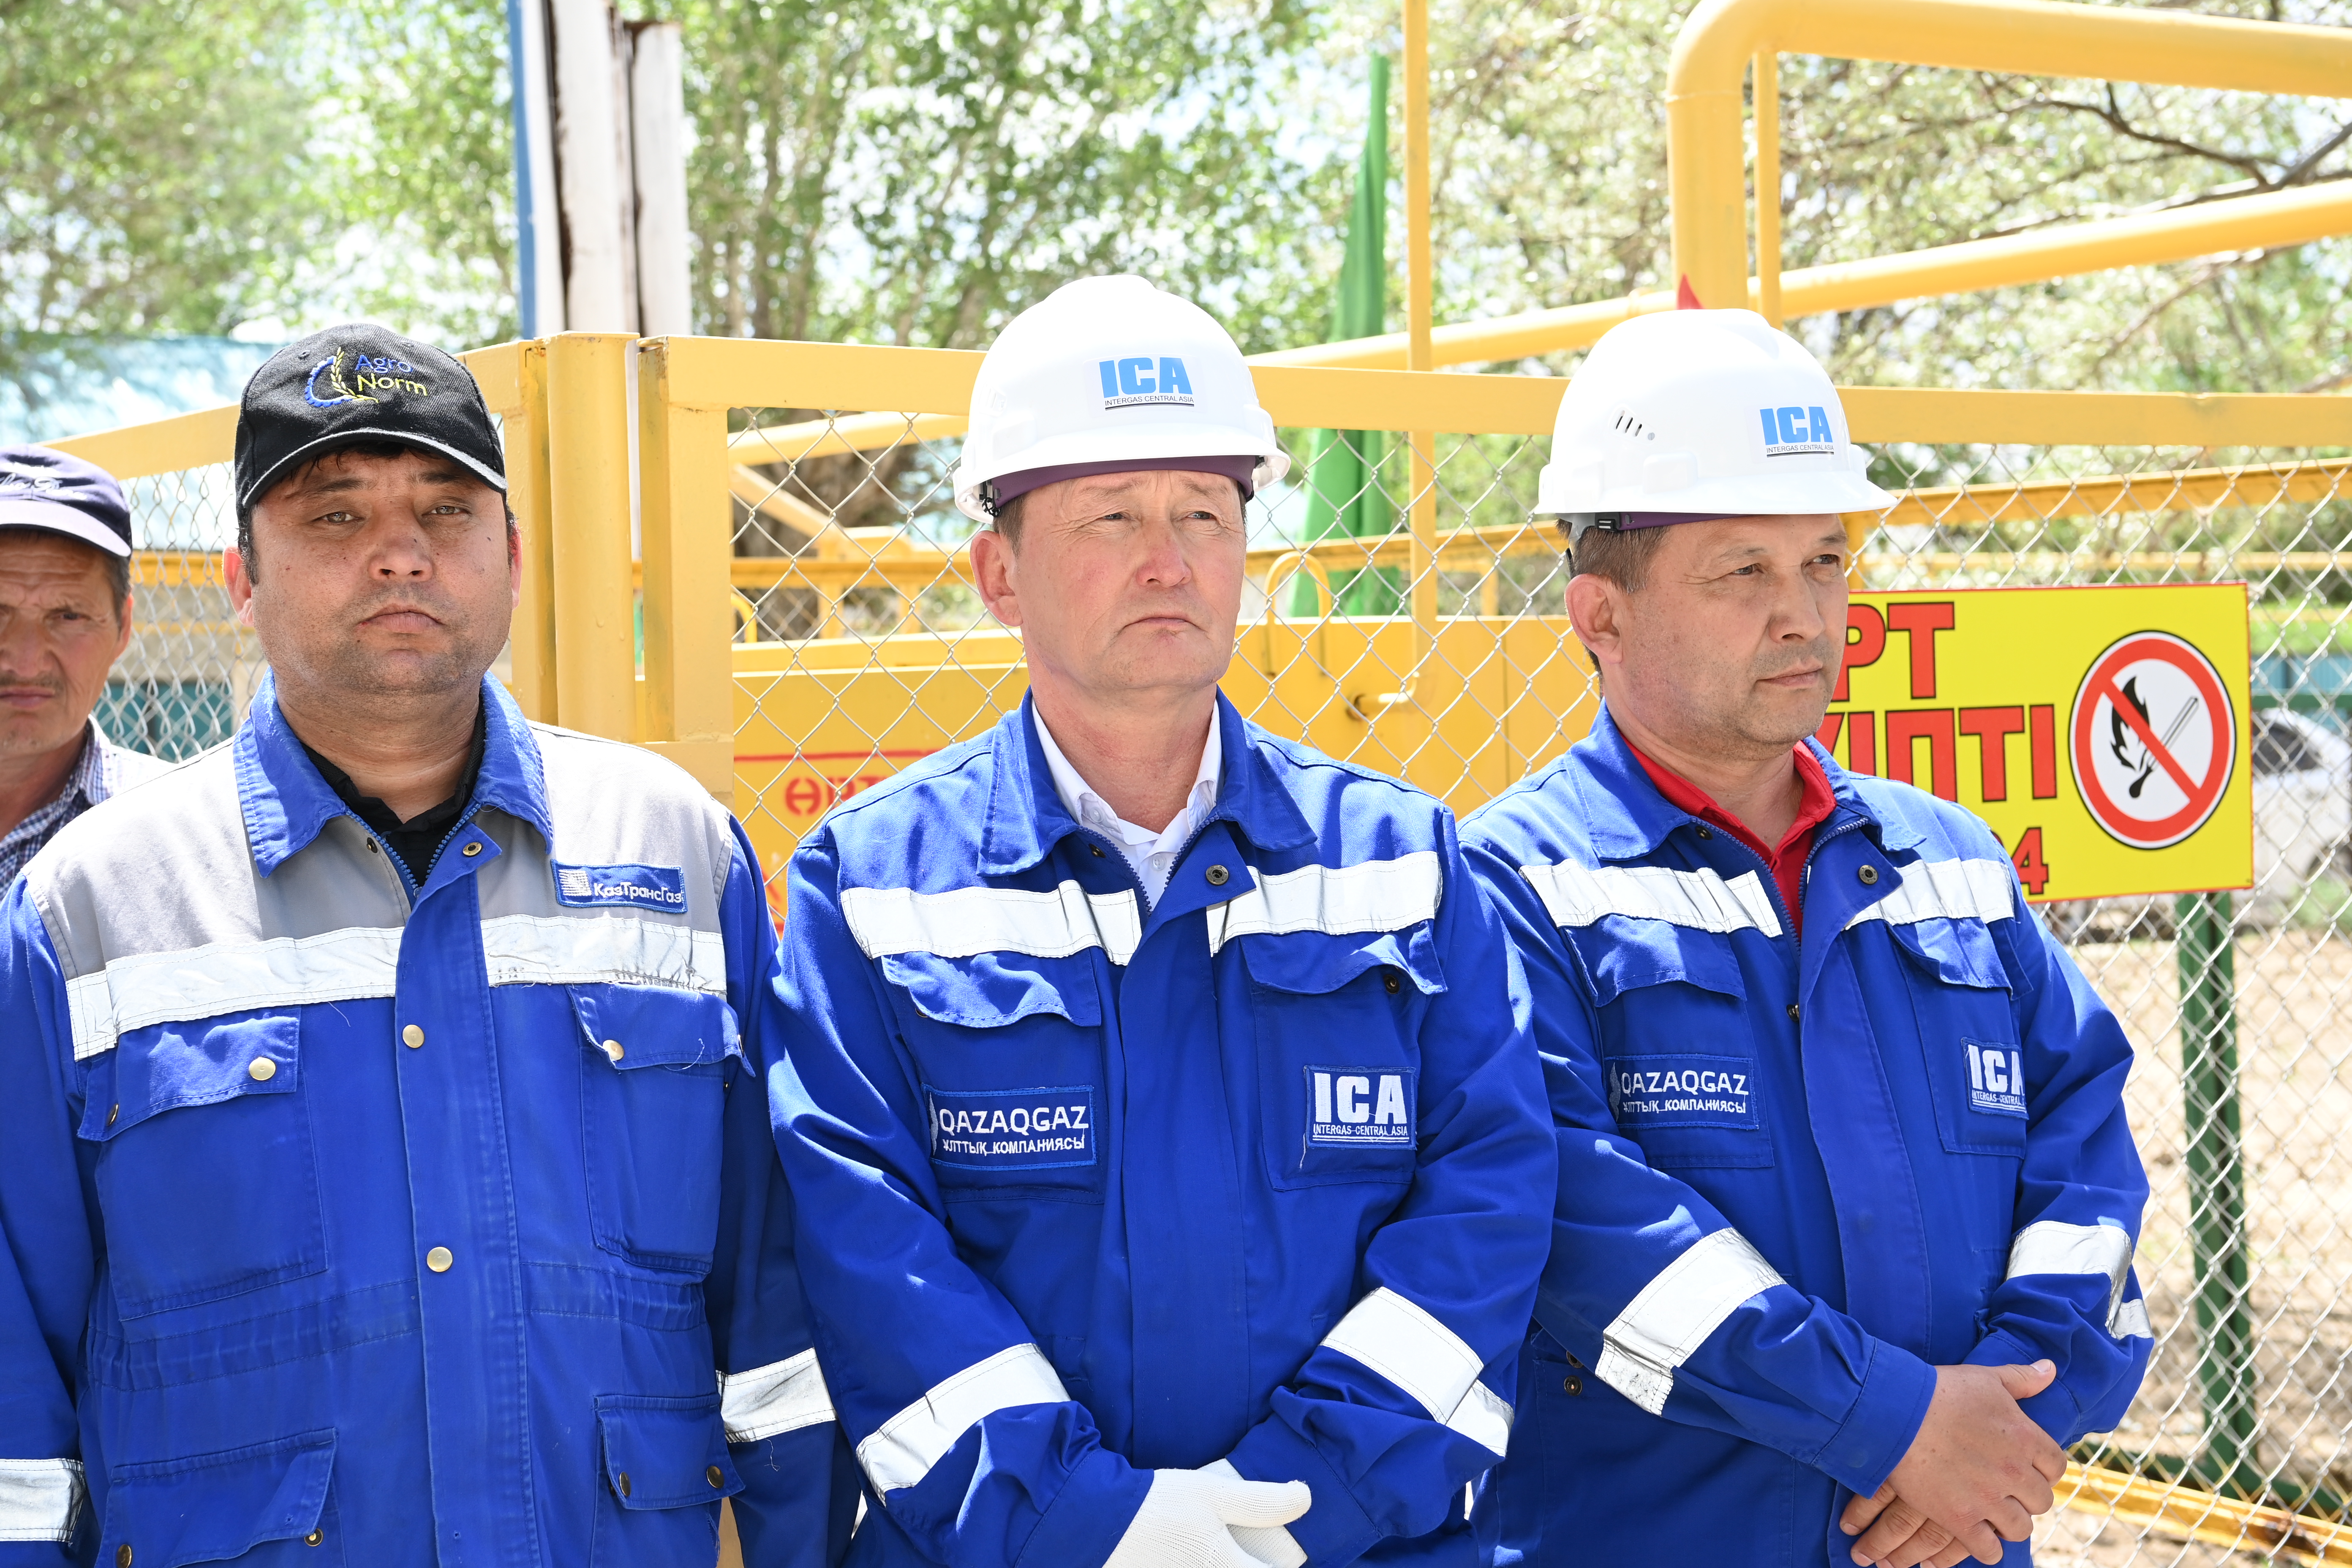 Gasification took place in two aul districts in the Shieli district